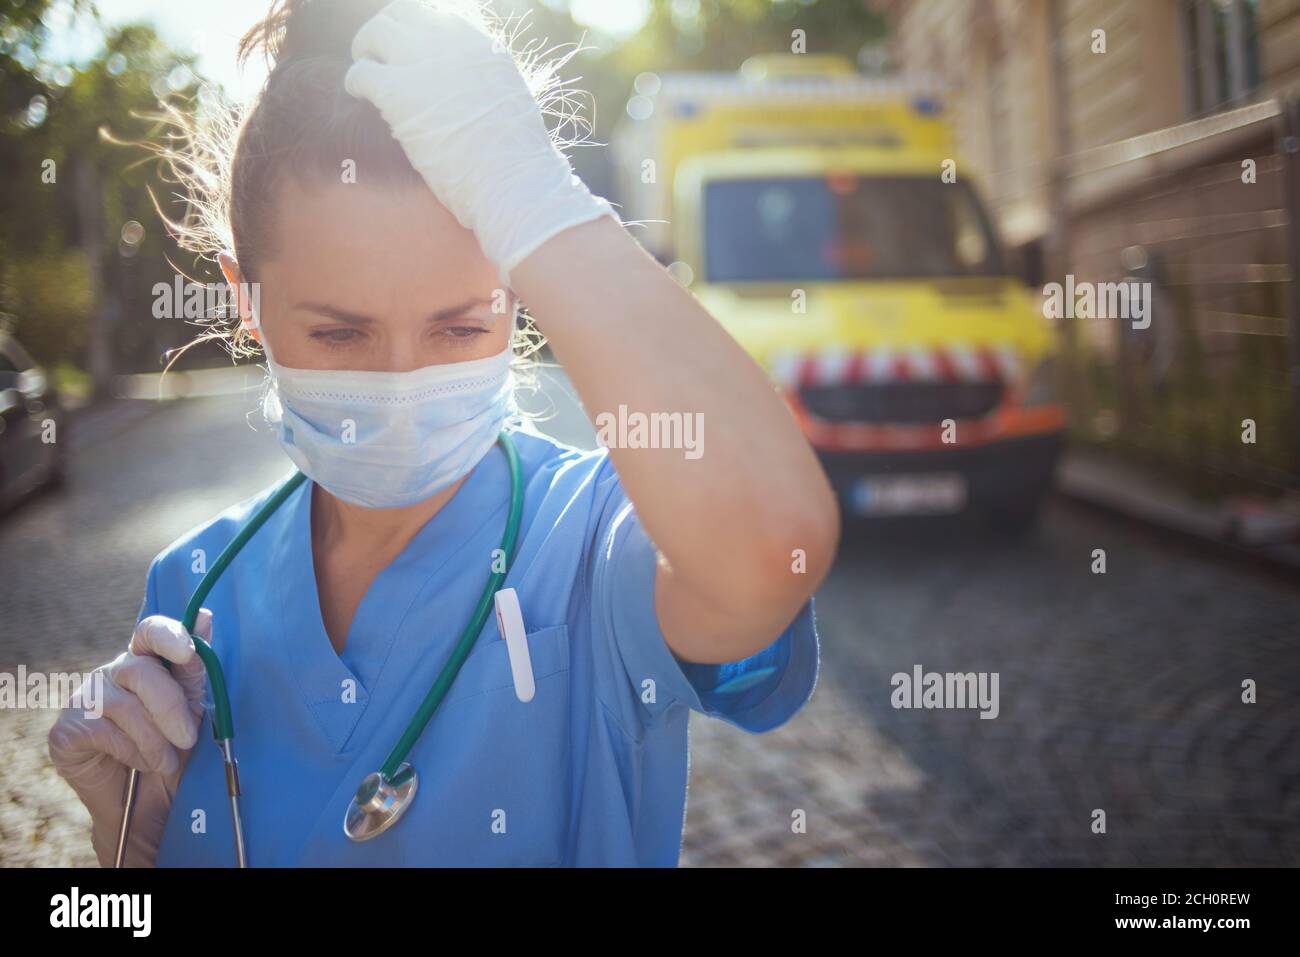 coronavirus pandemic. sad modern medical doctor woman in scrubs with stethoscope and medical mask outdoors near ambulance. Stock Photo